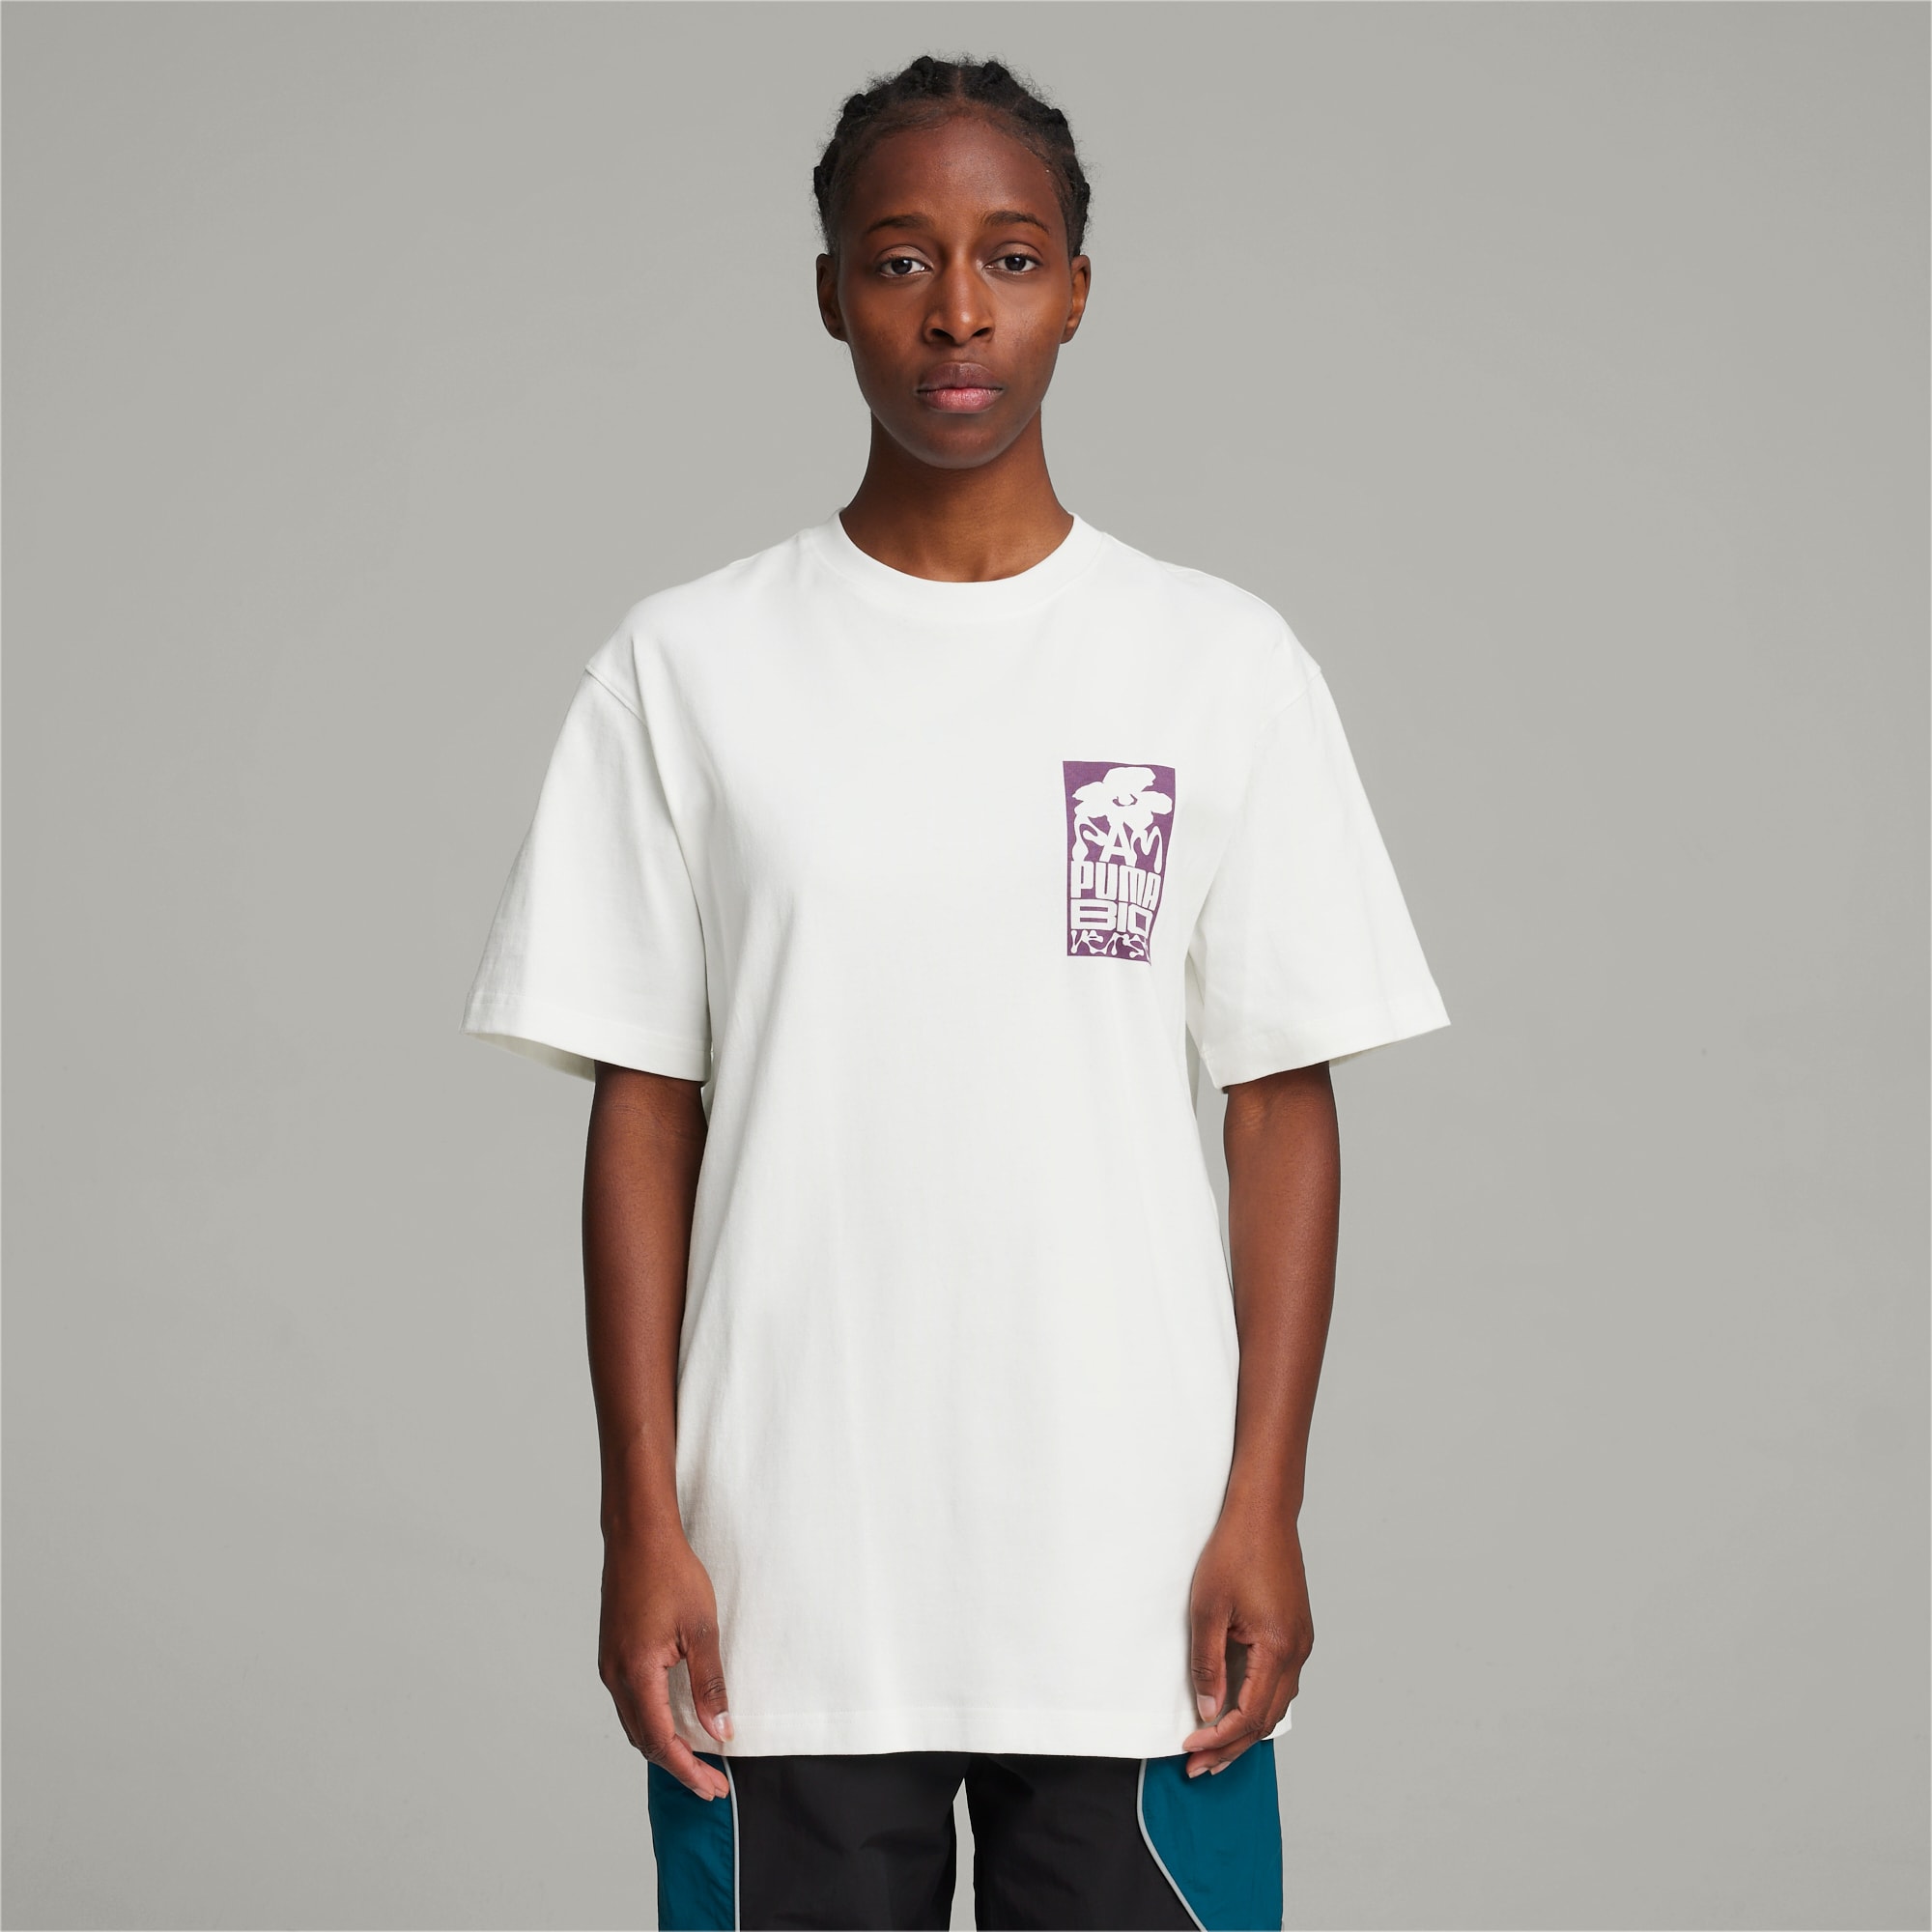 PUMA X PERKS AND MINI T-shirt Voor Dames, Wit